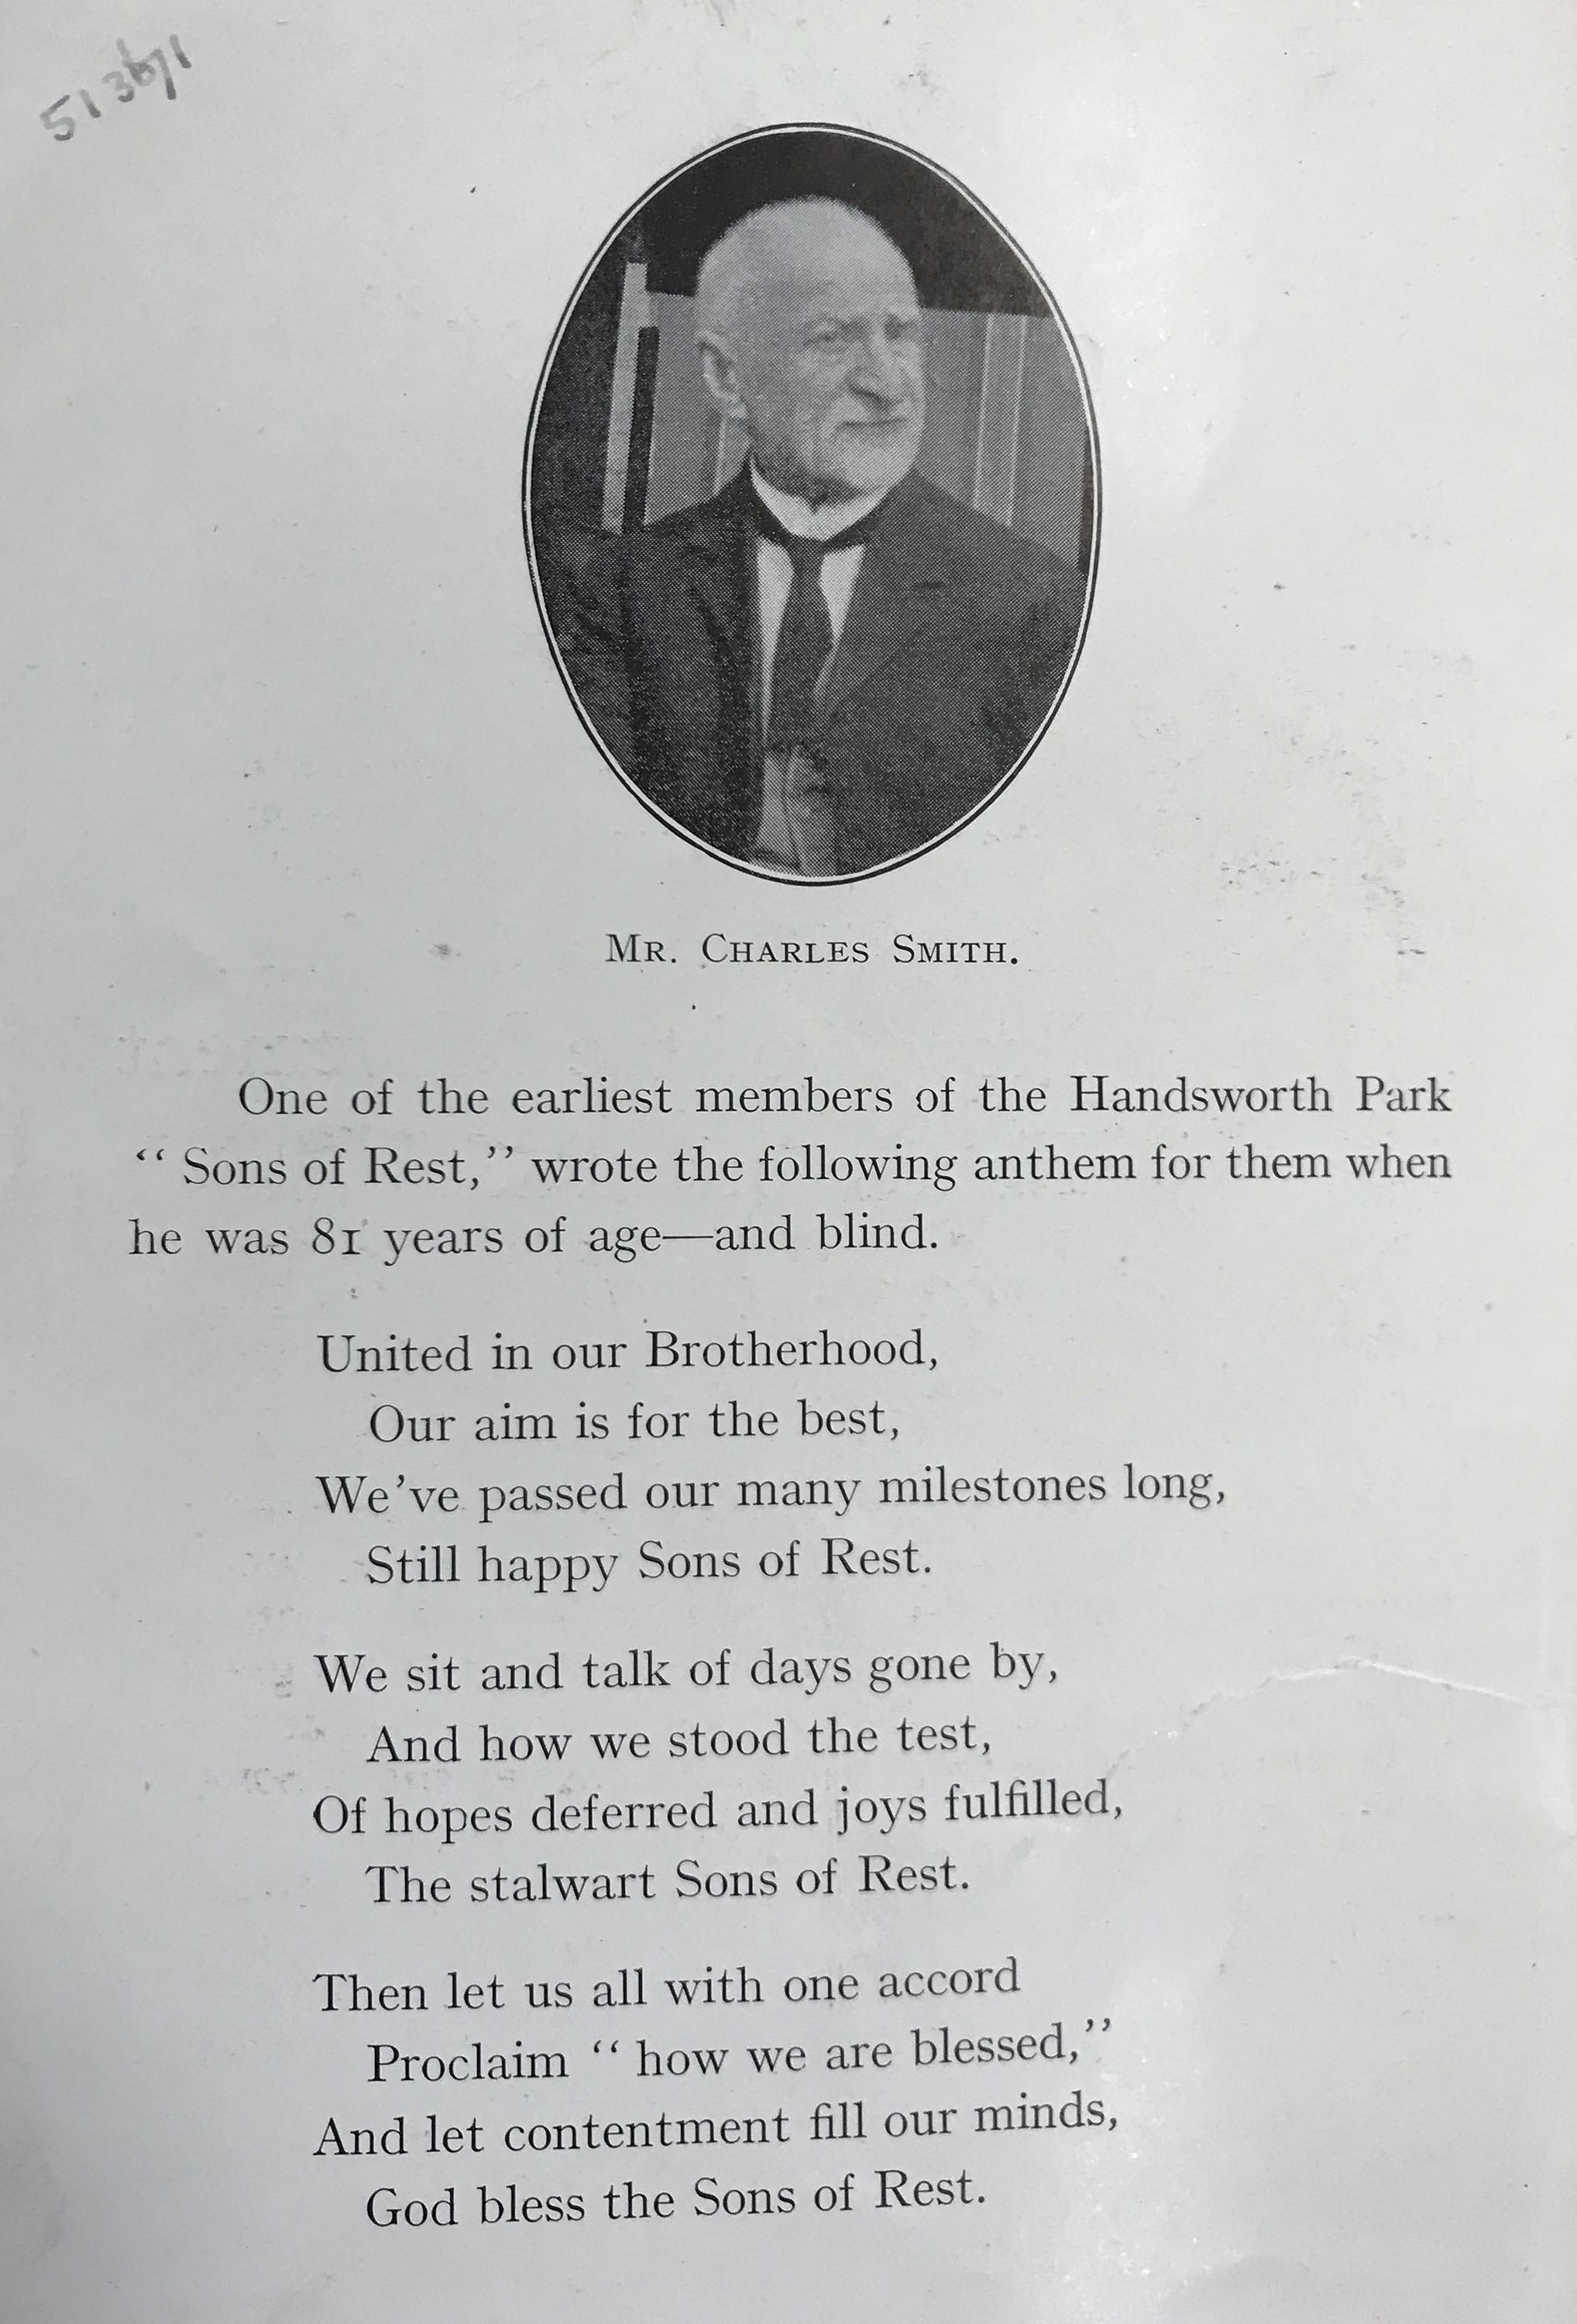 CHARLES SMITH'S POEM ABOUT THE SONS OF REST